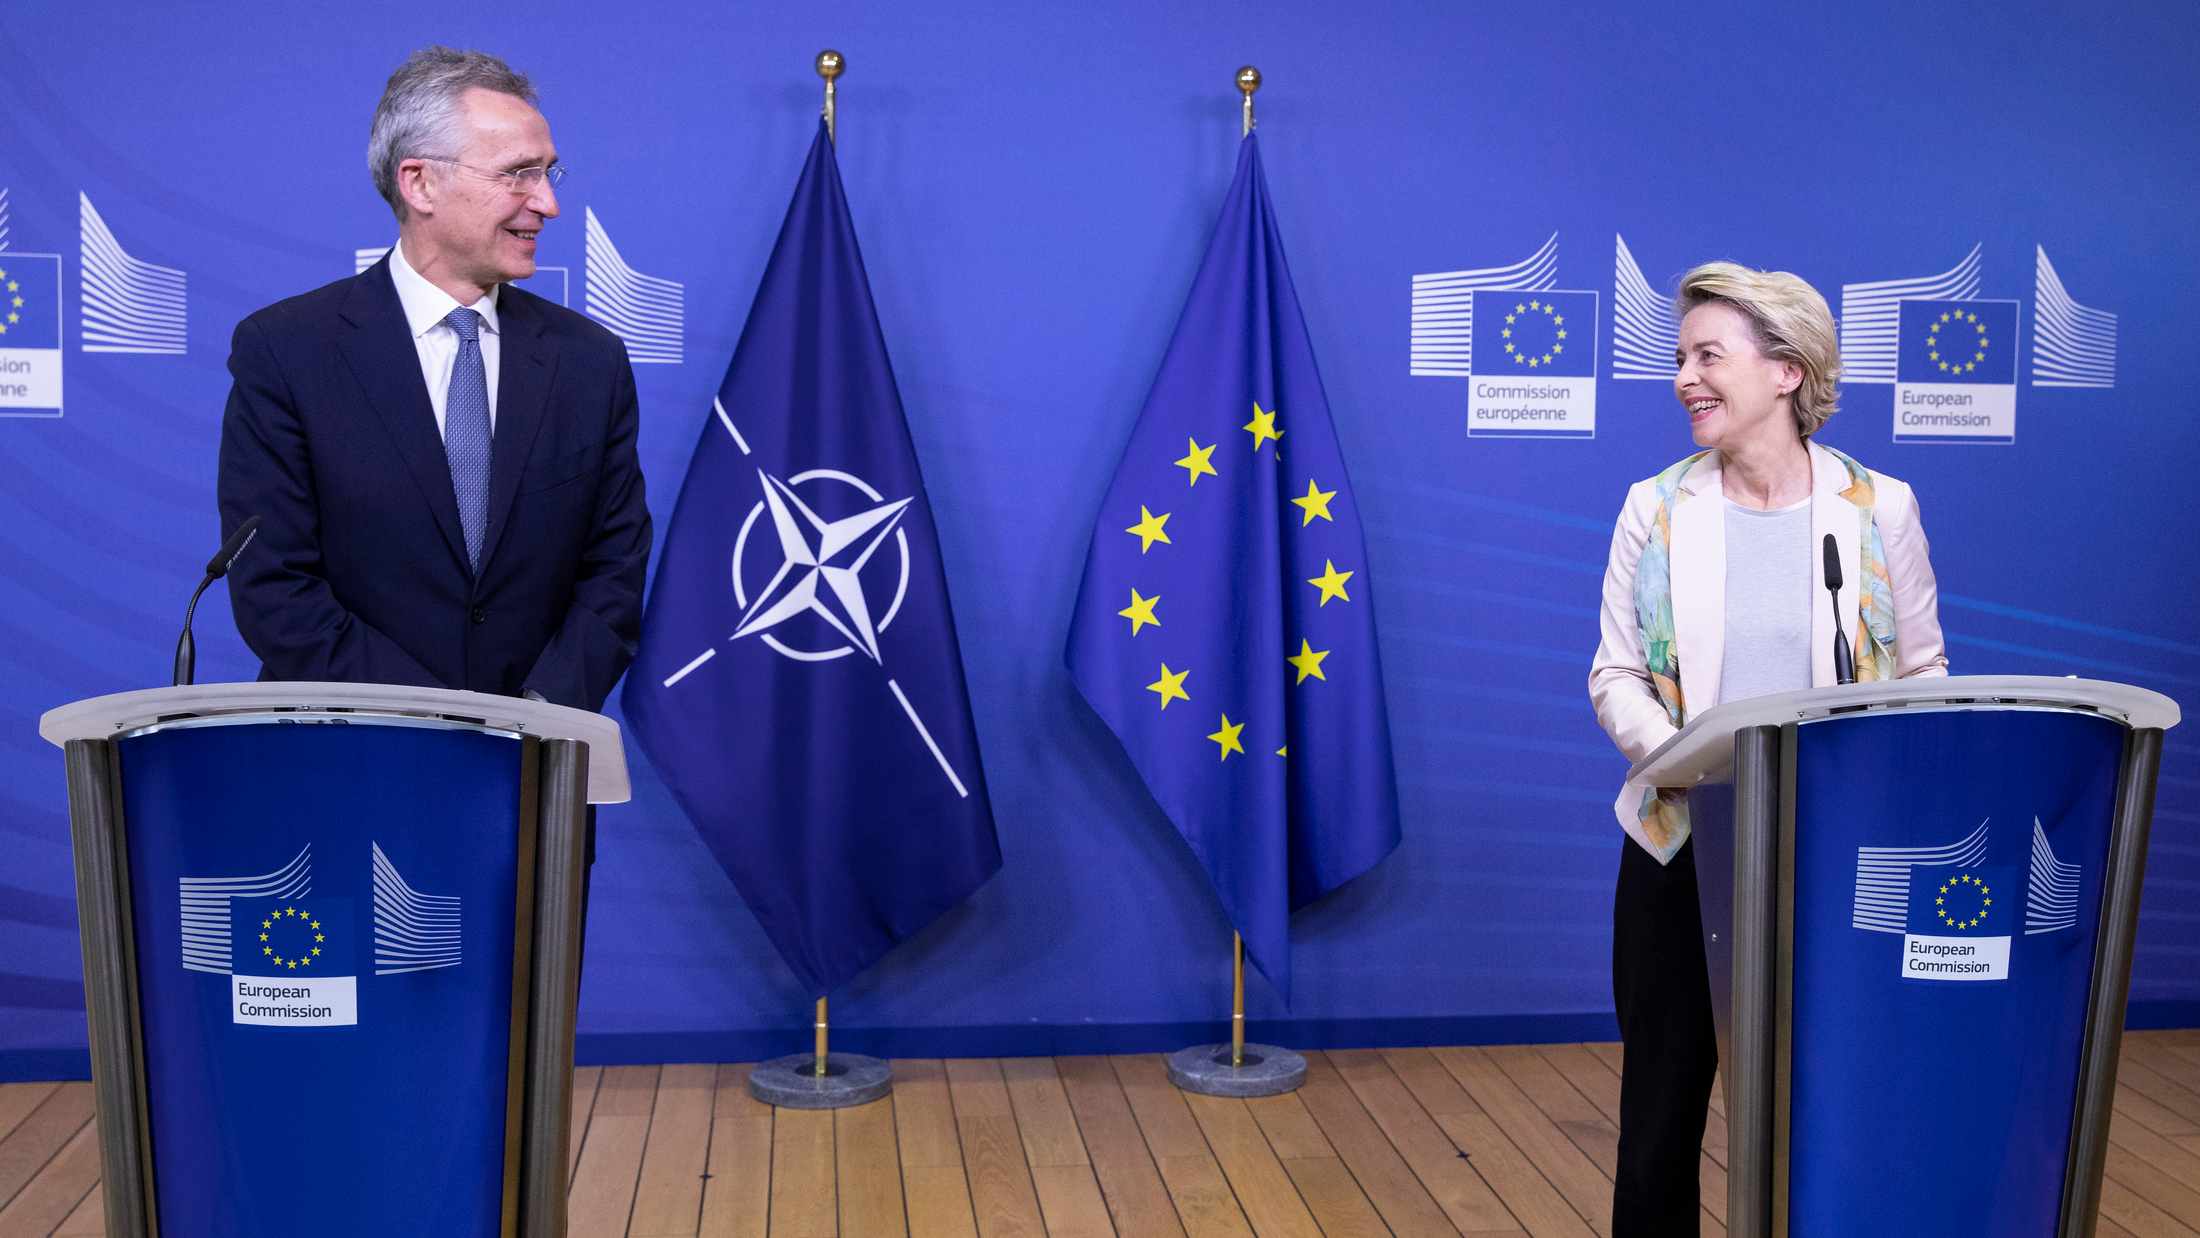 Joint press statements by NATO Secretary General Jens Stoltenberg and the President of European Commission, Ursula von der Leyen ahead of a meeting with the College of Commissioners. December 15, 2020. Credit: NATO.